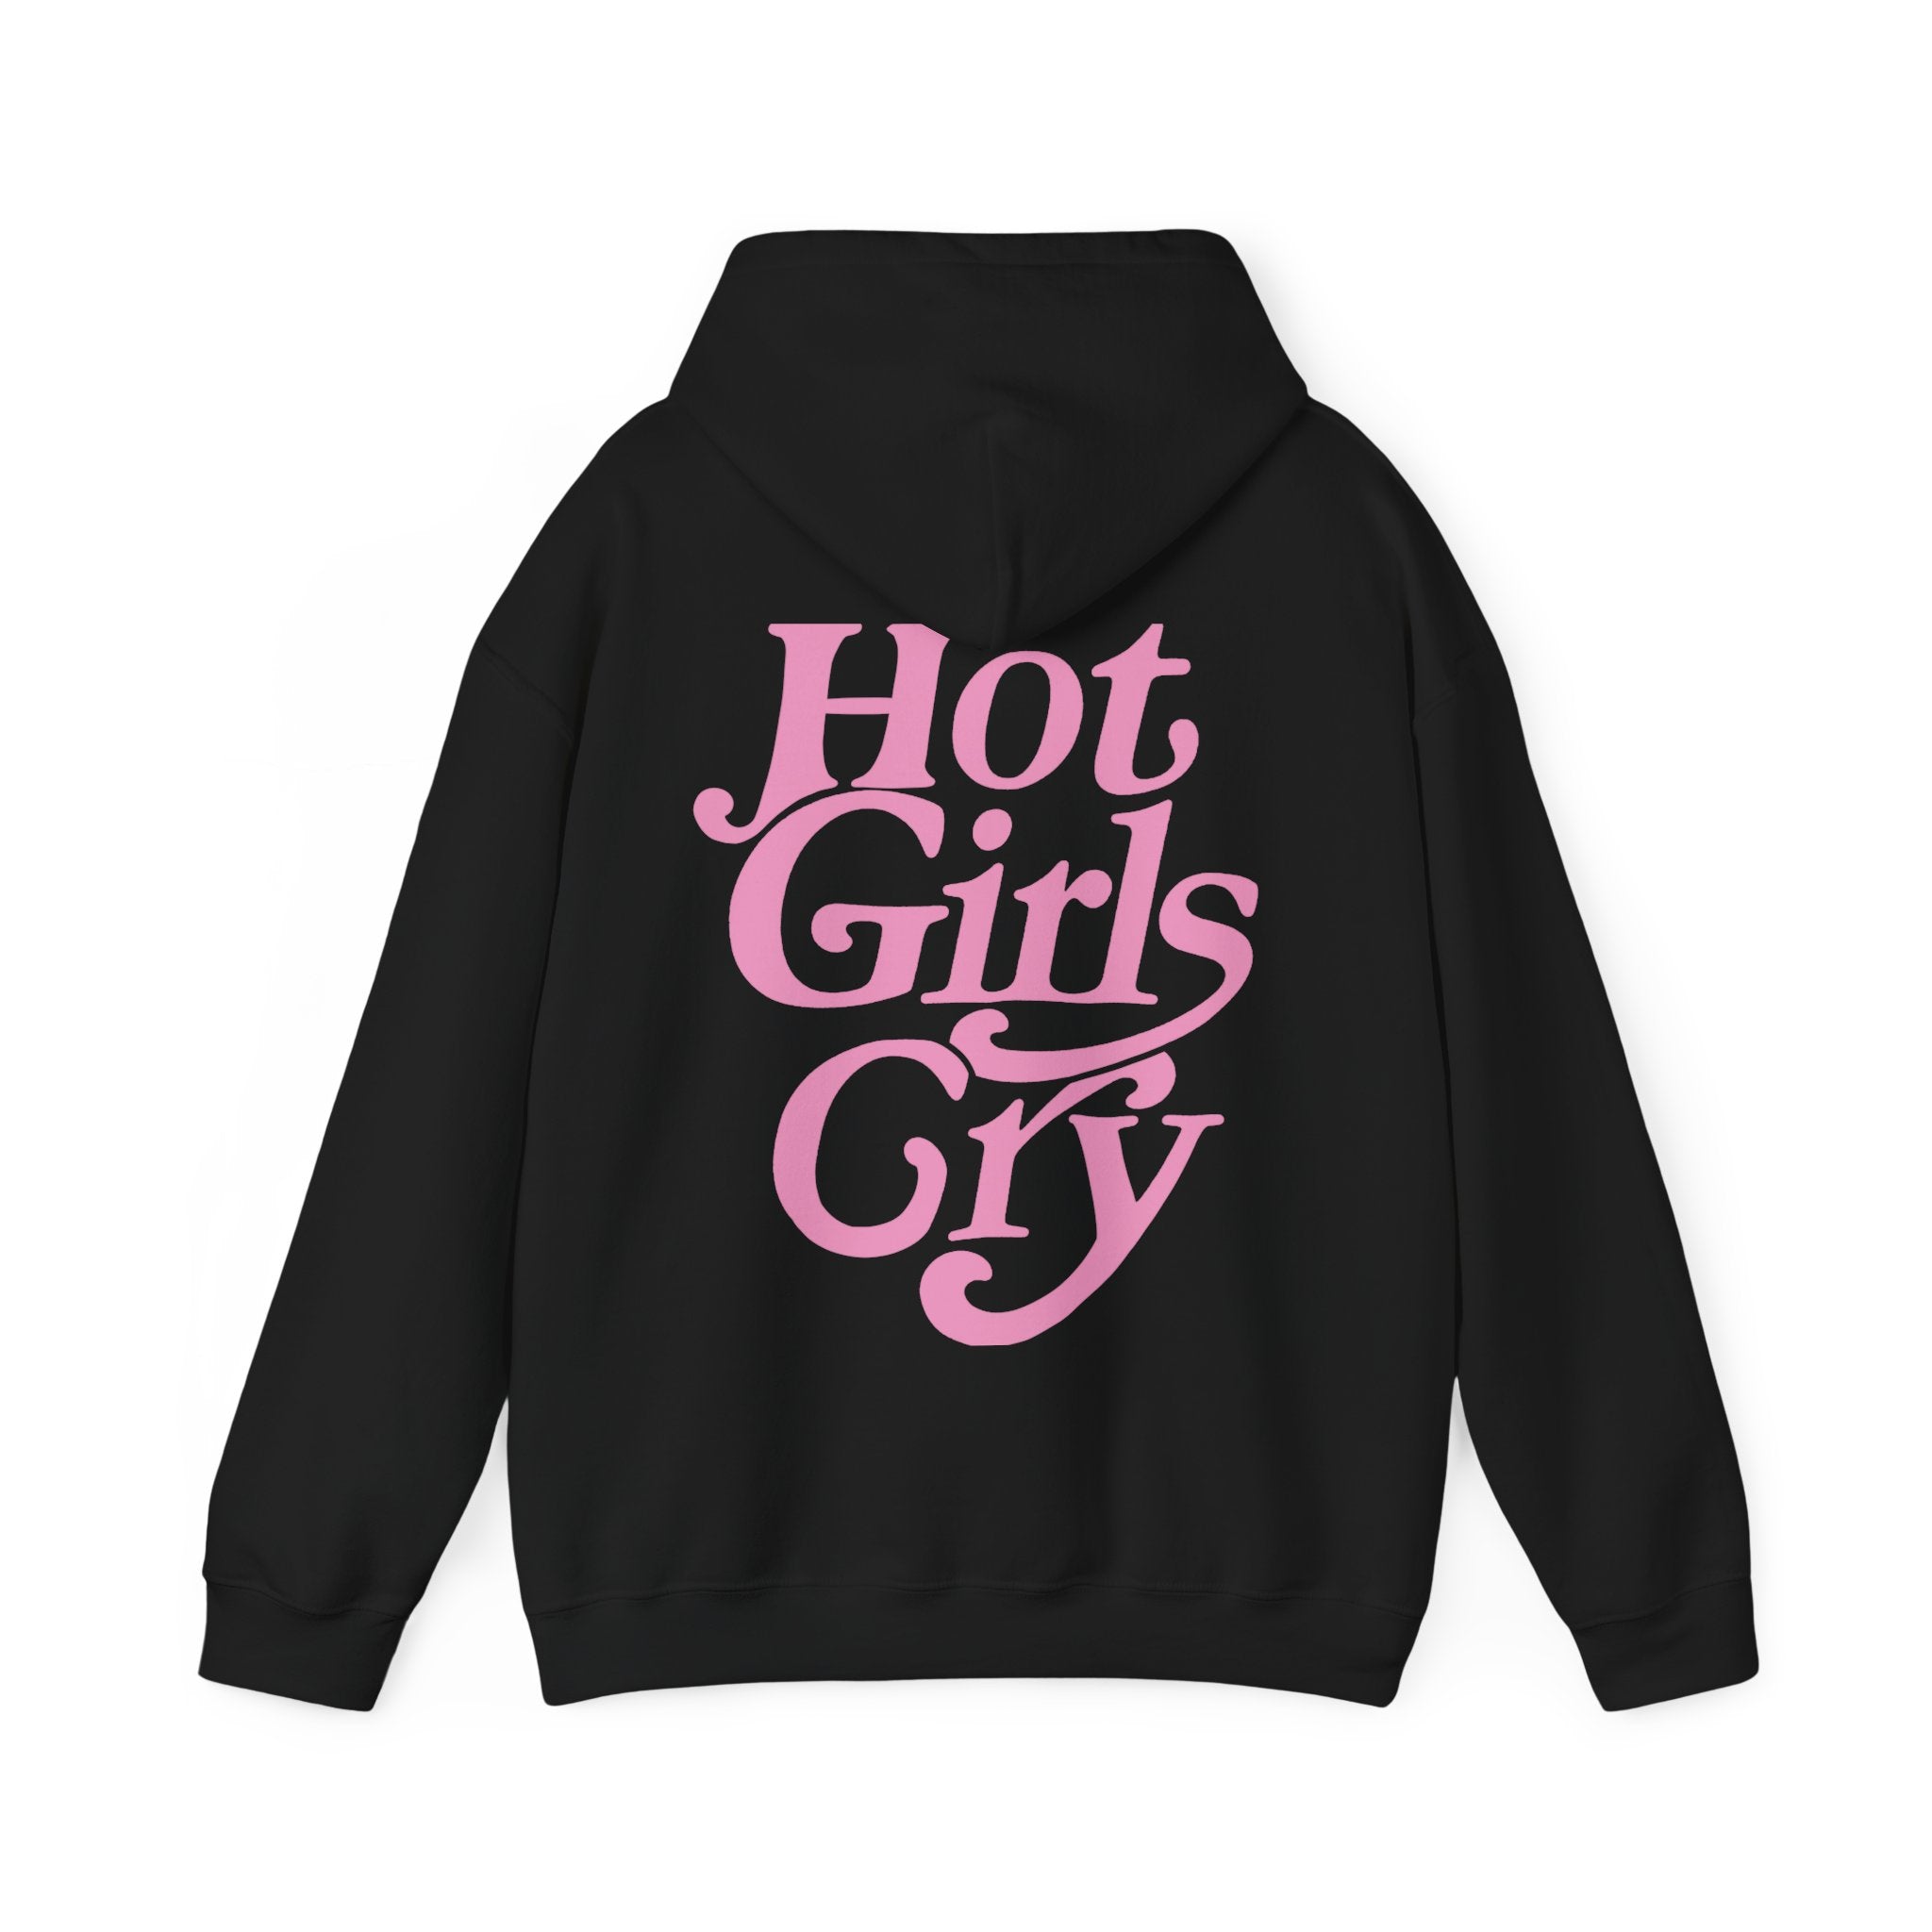 Hot Girls Cry